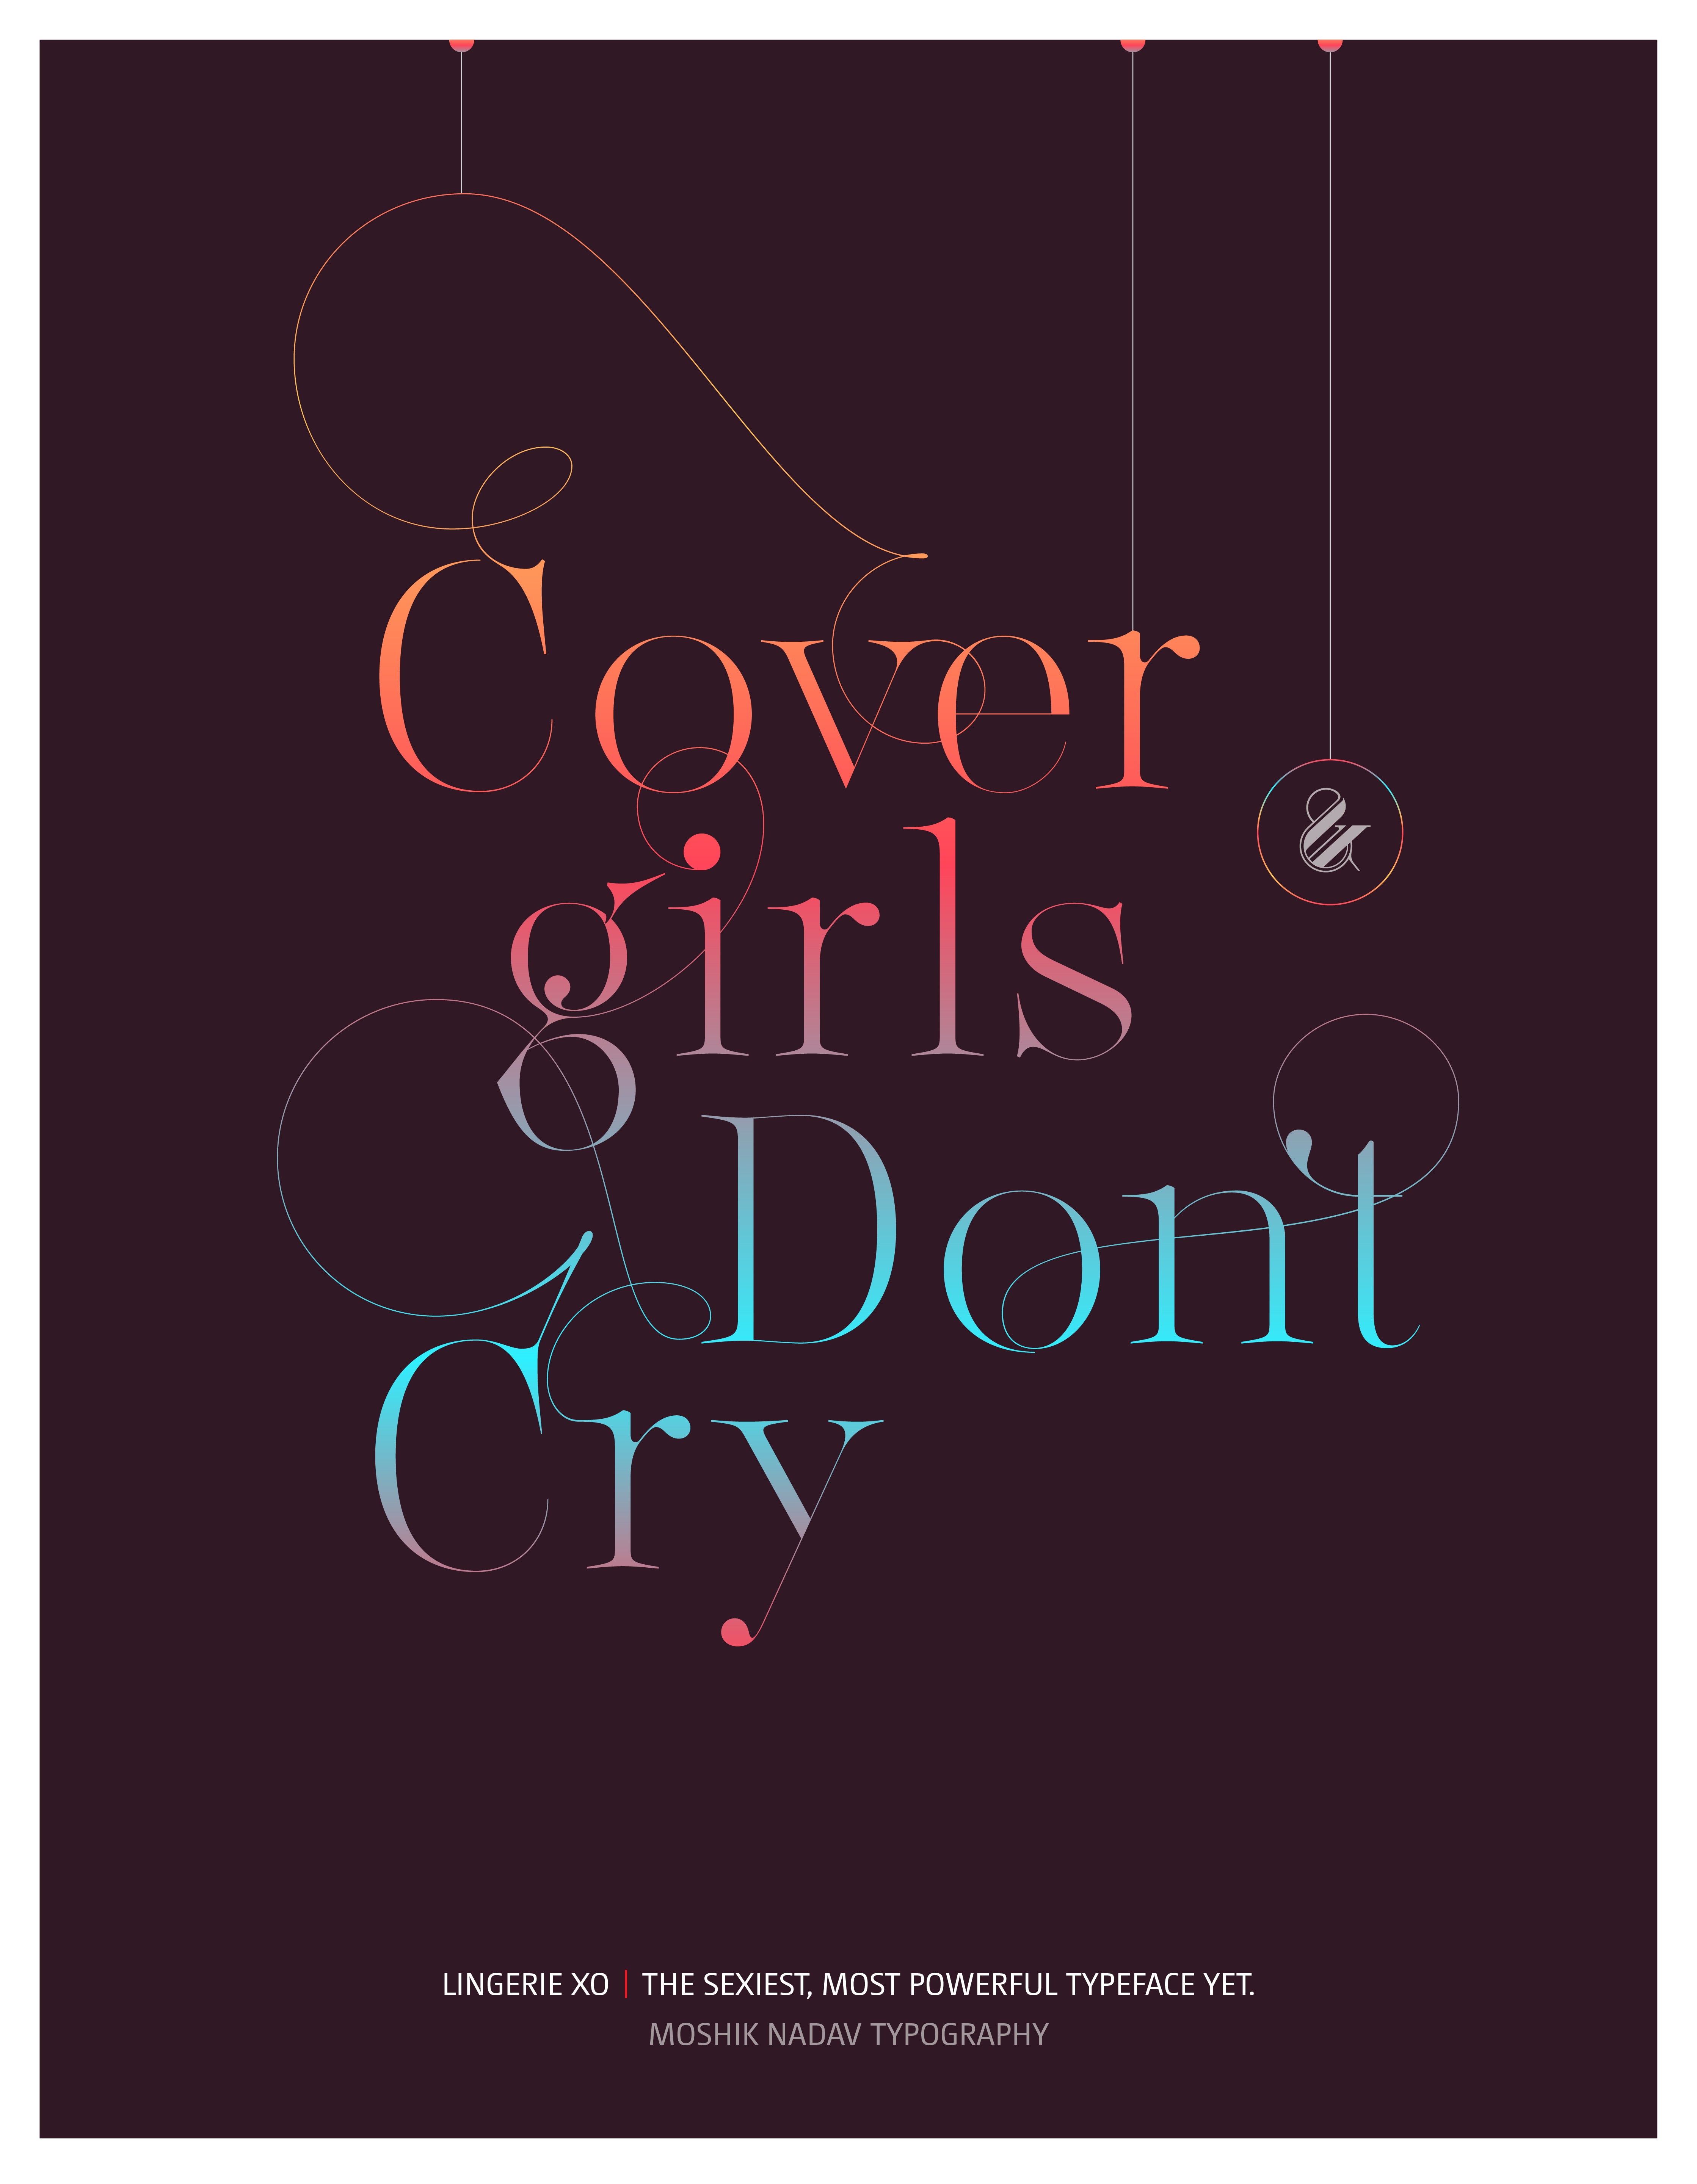 Cover girls don't cry - Designed with the sexy font Lingerie XO by Moshik Nadav Fashion Typography NYC